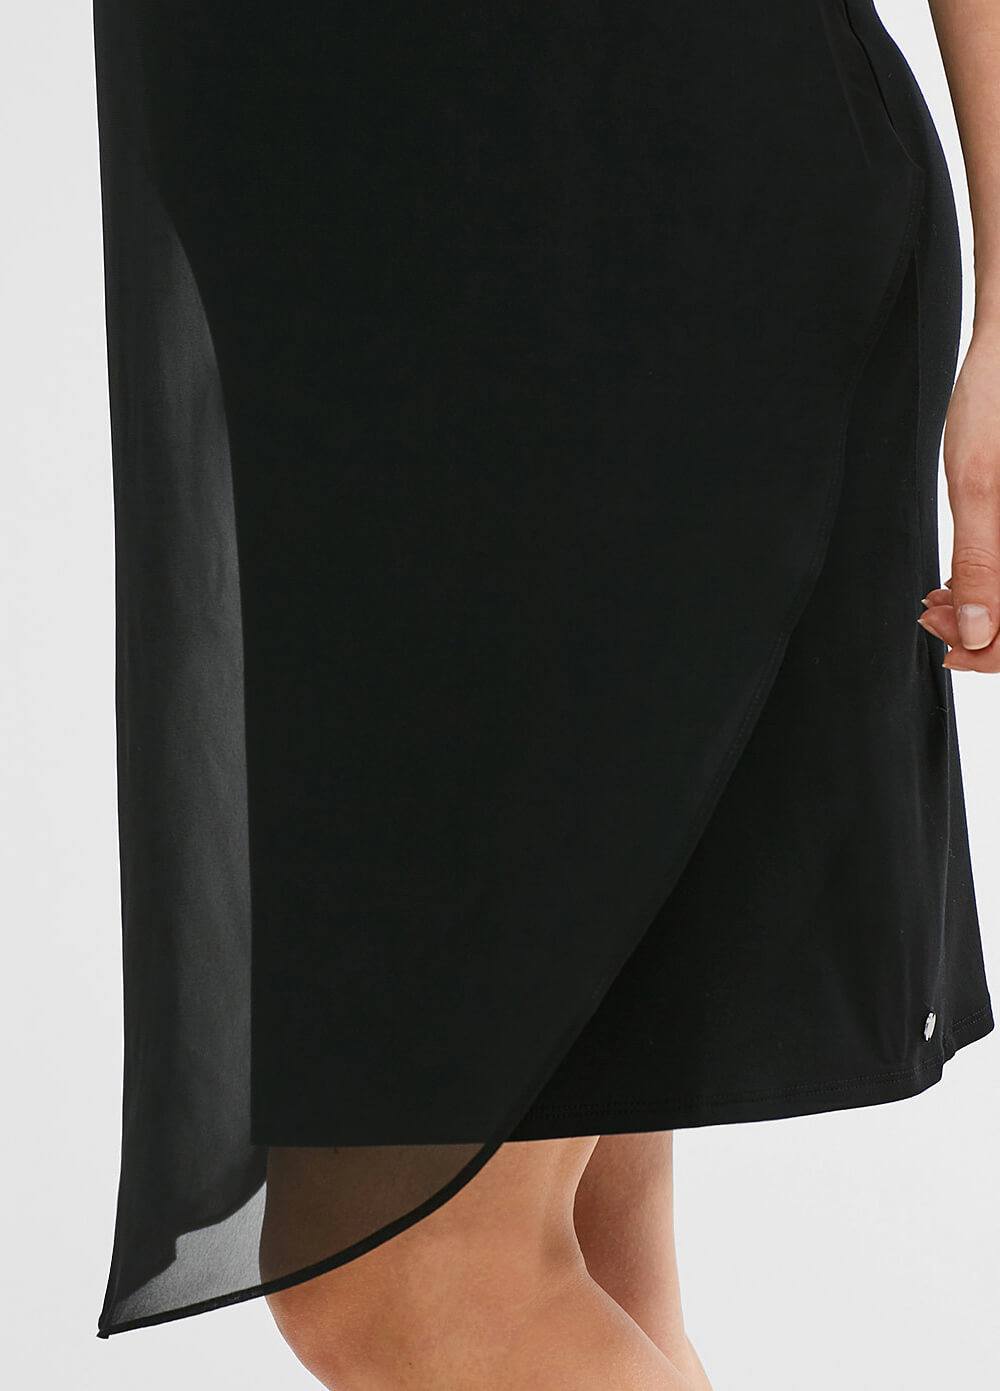 One-Shouldered Maternity Party Dress in Black by Esprit